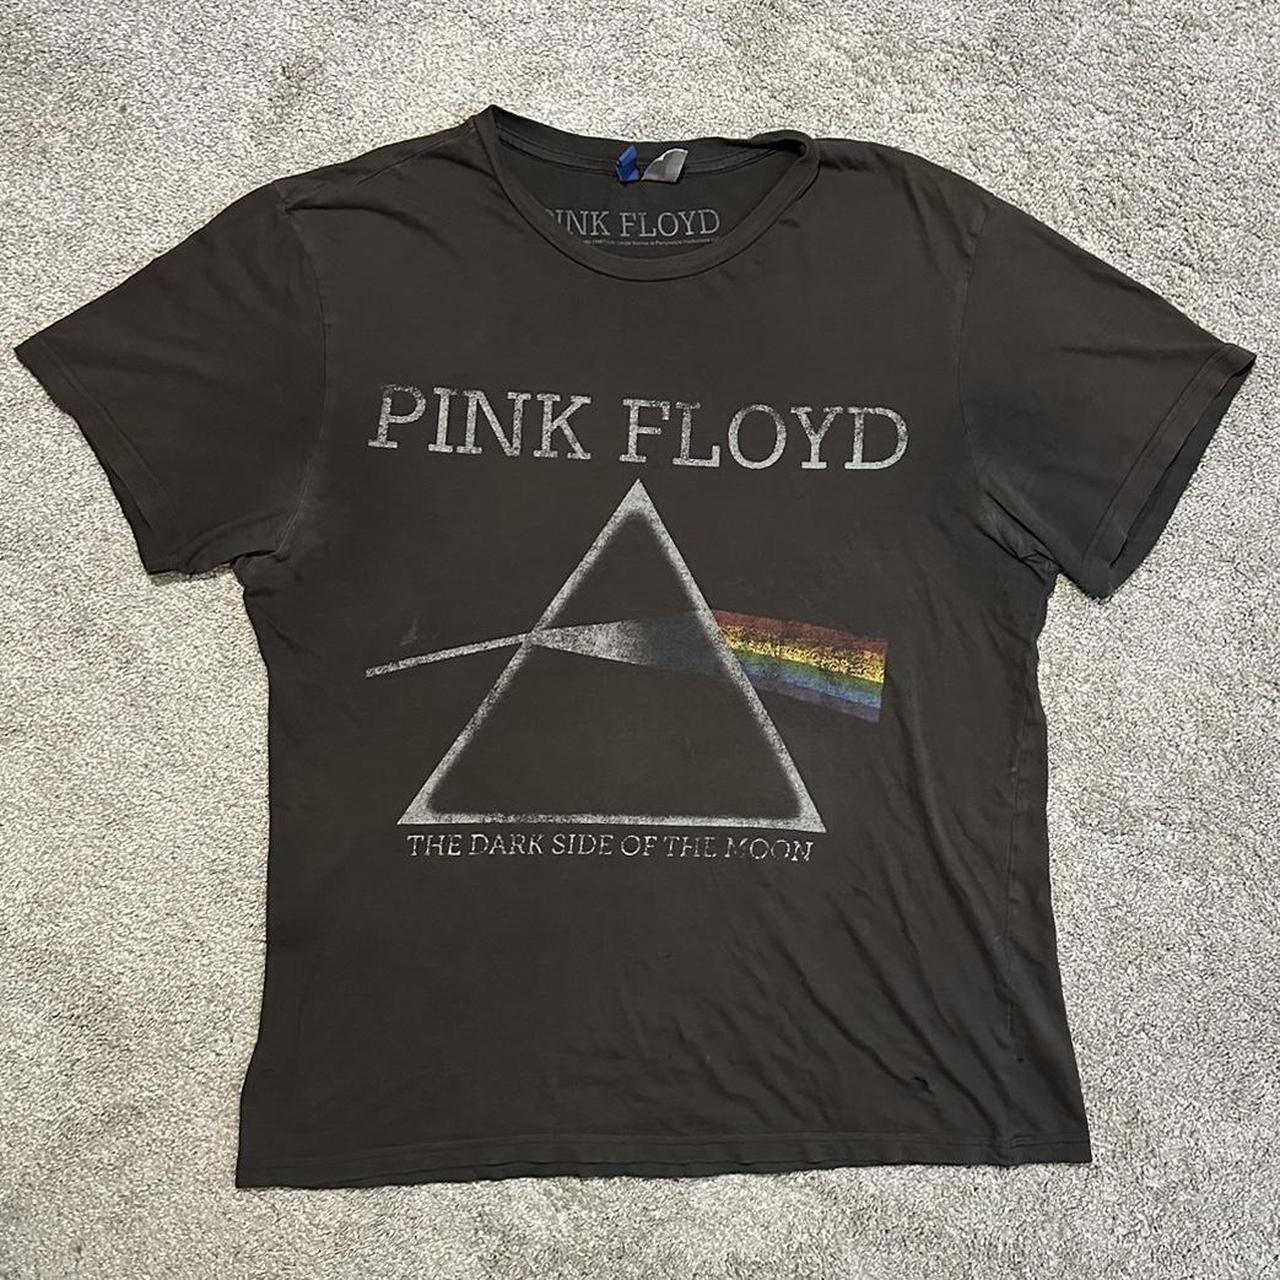 Pink Floyd t shirt 🎶 US your 1973 2017®️ Shipping... - Depop